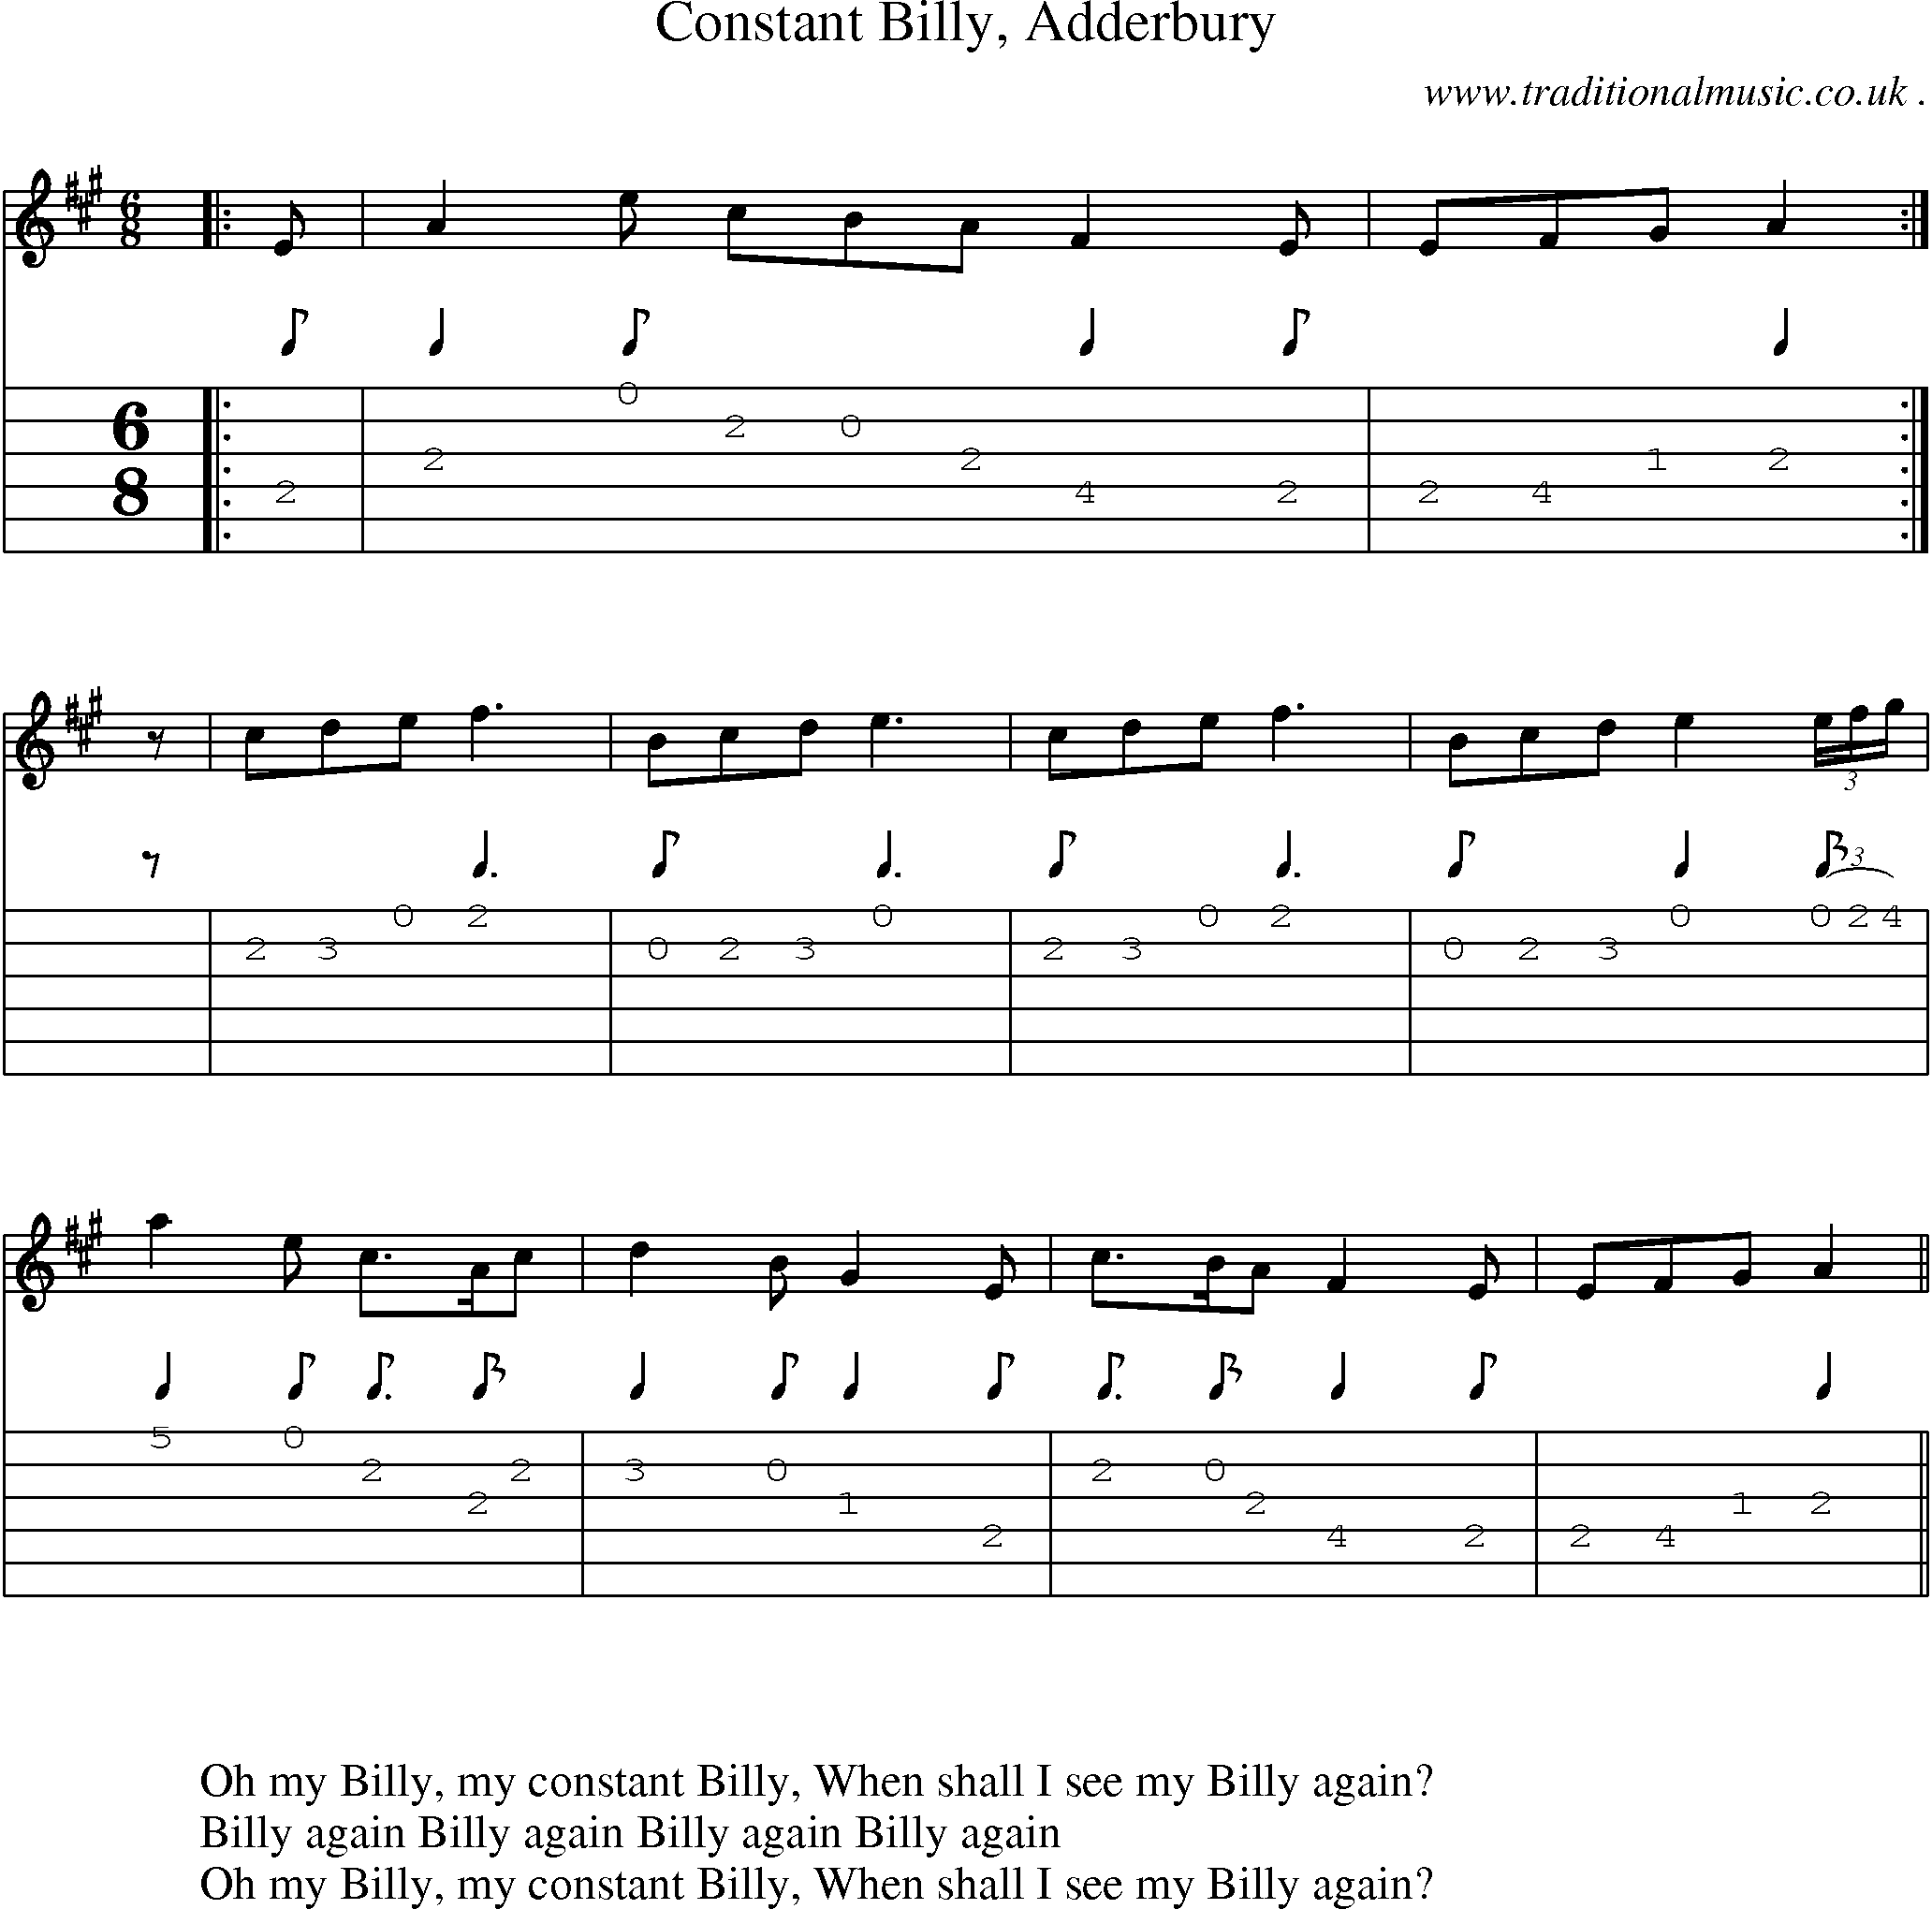 Sheet-Music and Guitar Tabs for Constant Billy Adderbury